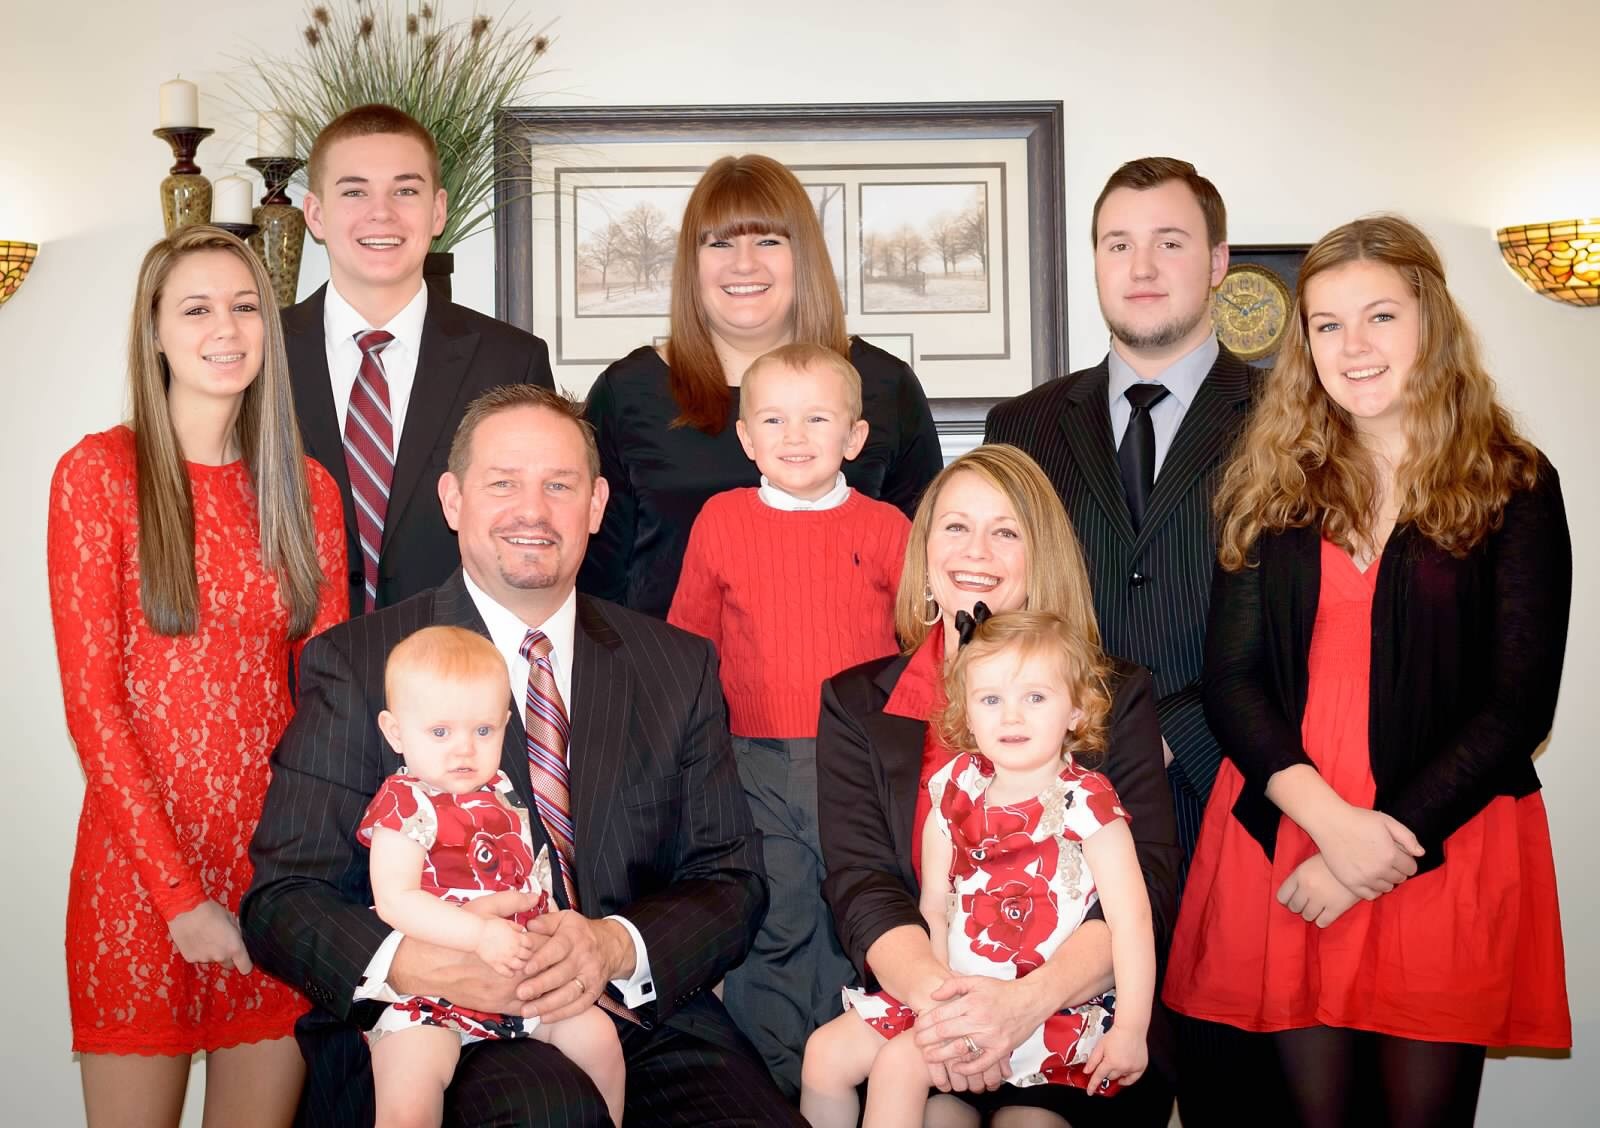 John and Dodi Geisler have eight children as a result of a blended family.